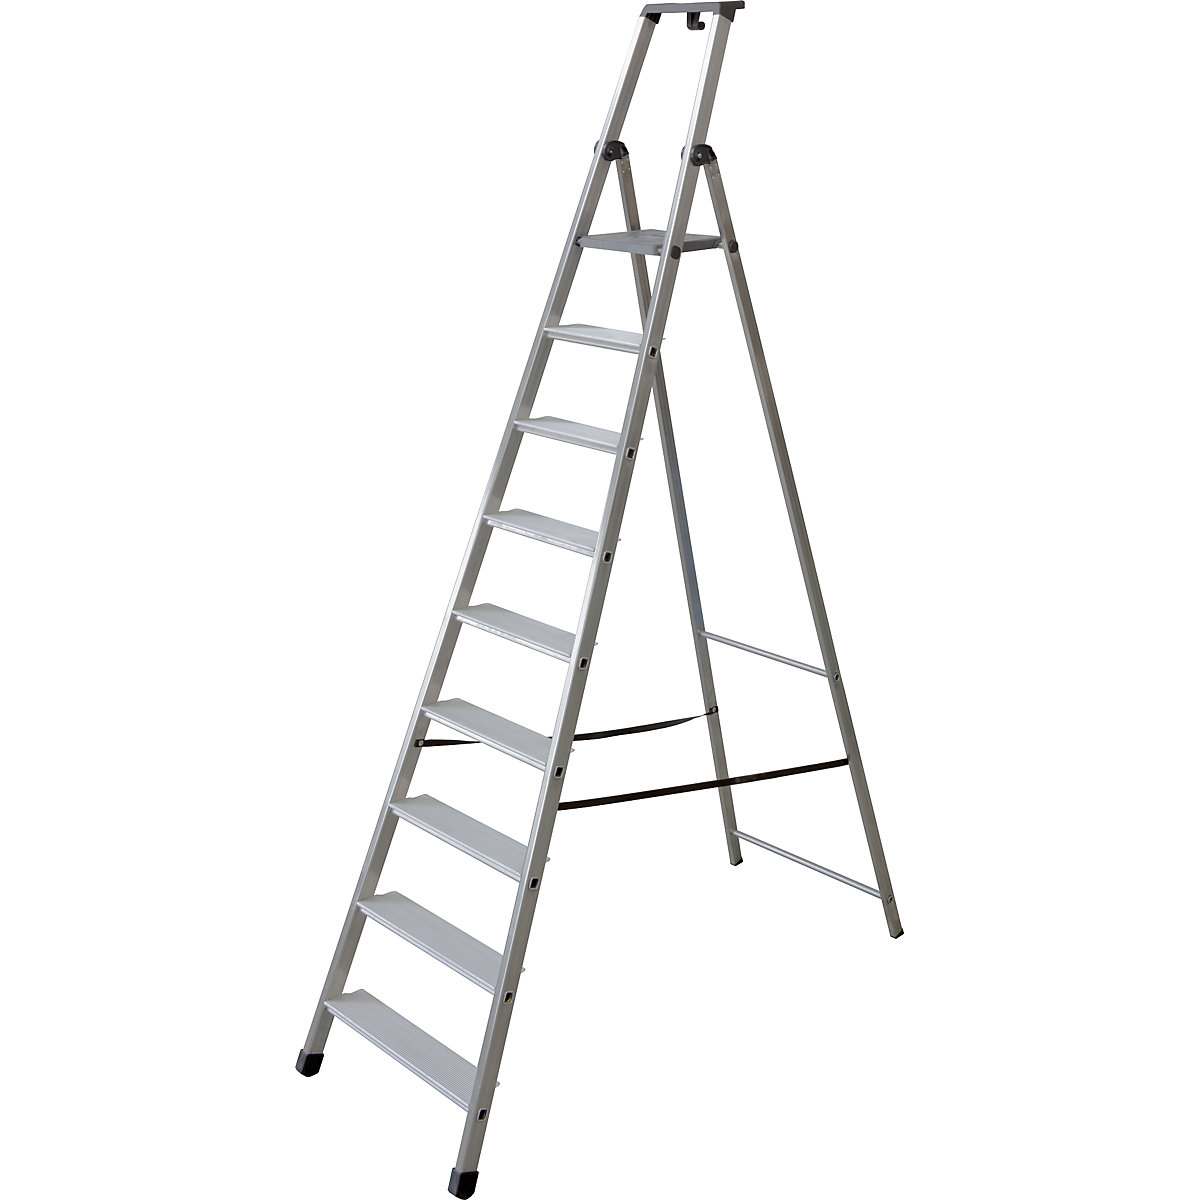 Step ladder, single sided access with extra deep steps, 9 steps incl. platform-2